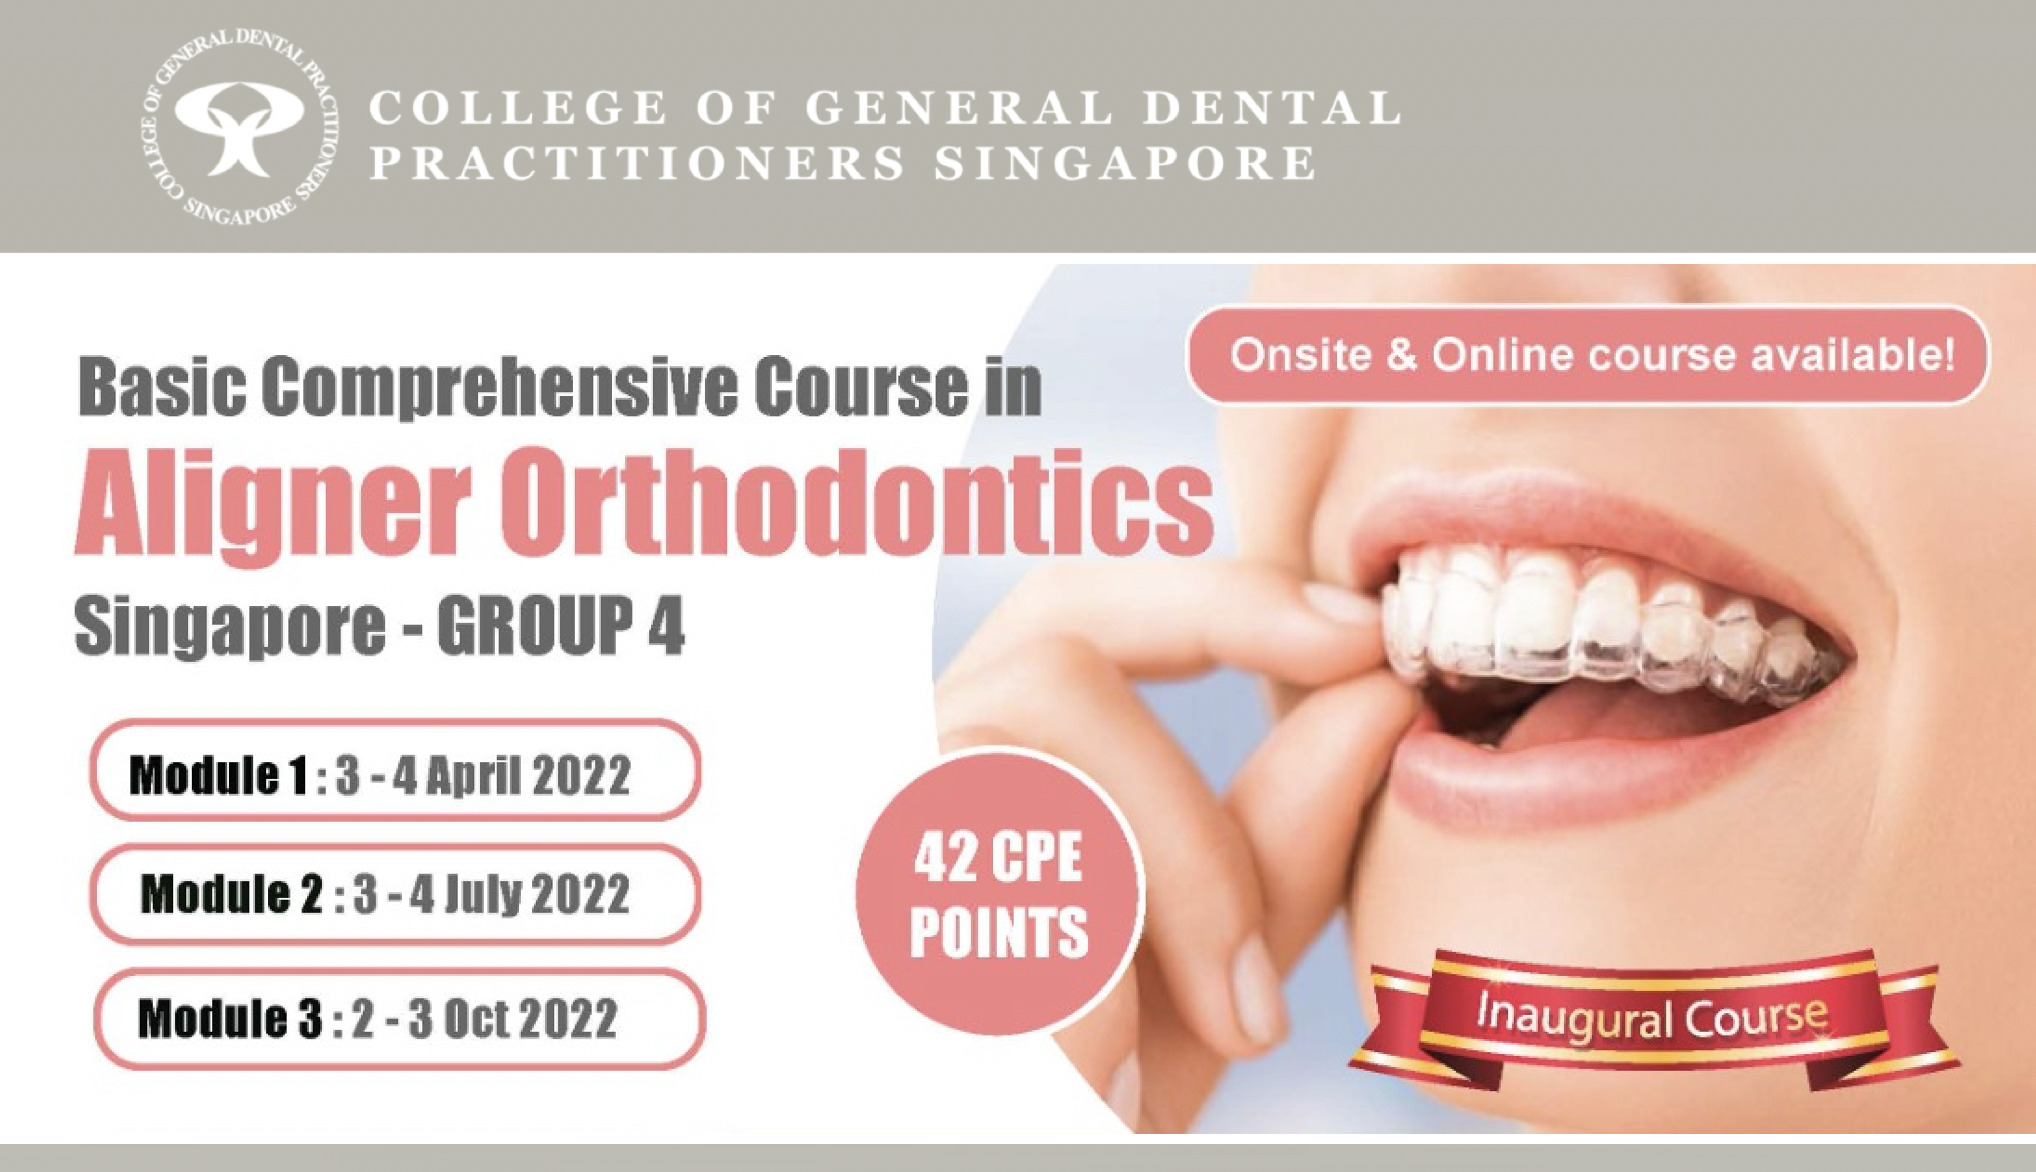 Basic Comprehensive Course in Aligner Orthodontics (Group 4)